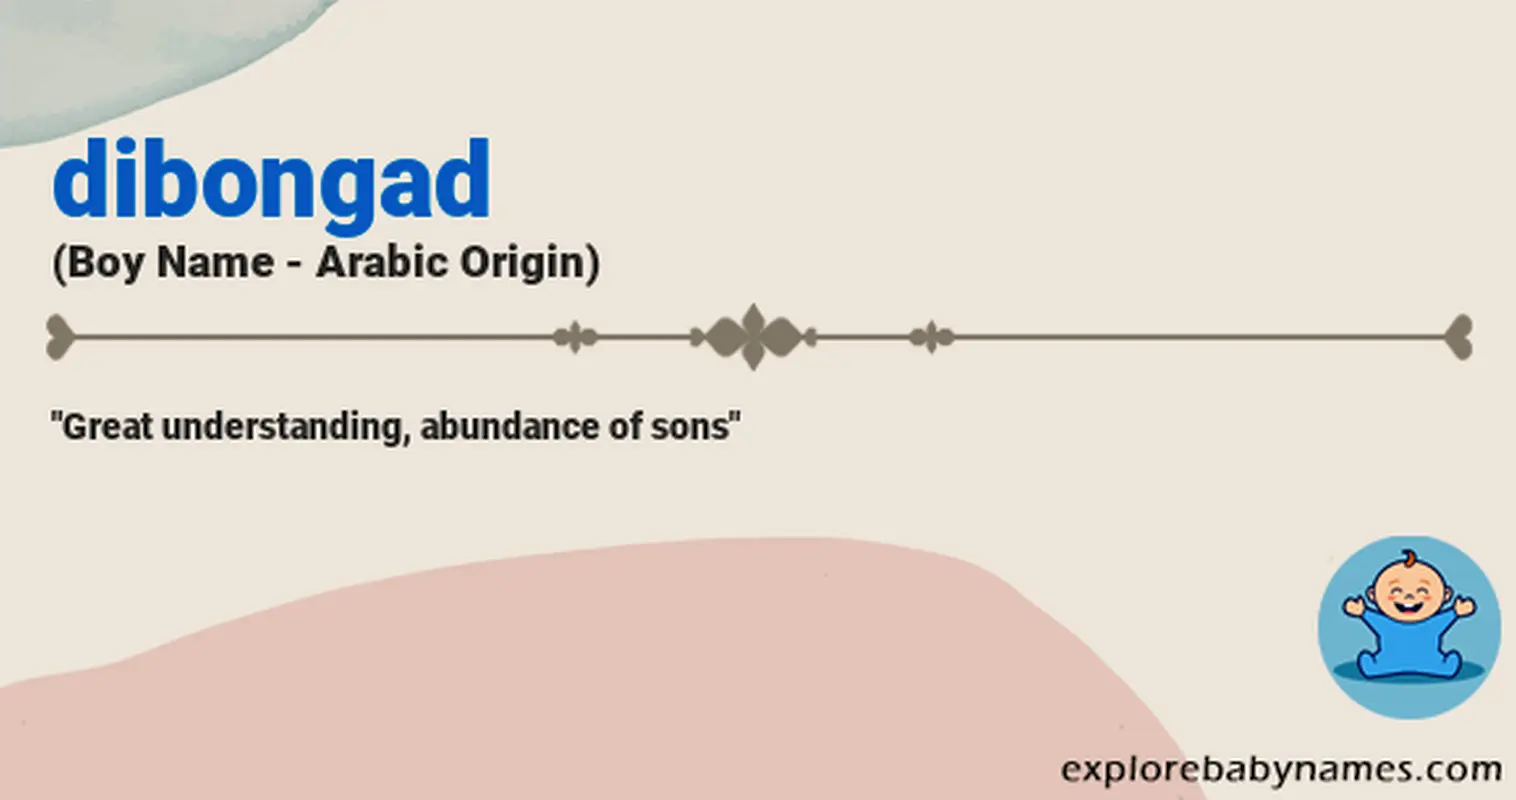 Meaning of Dibongad